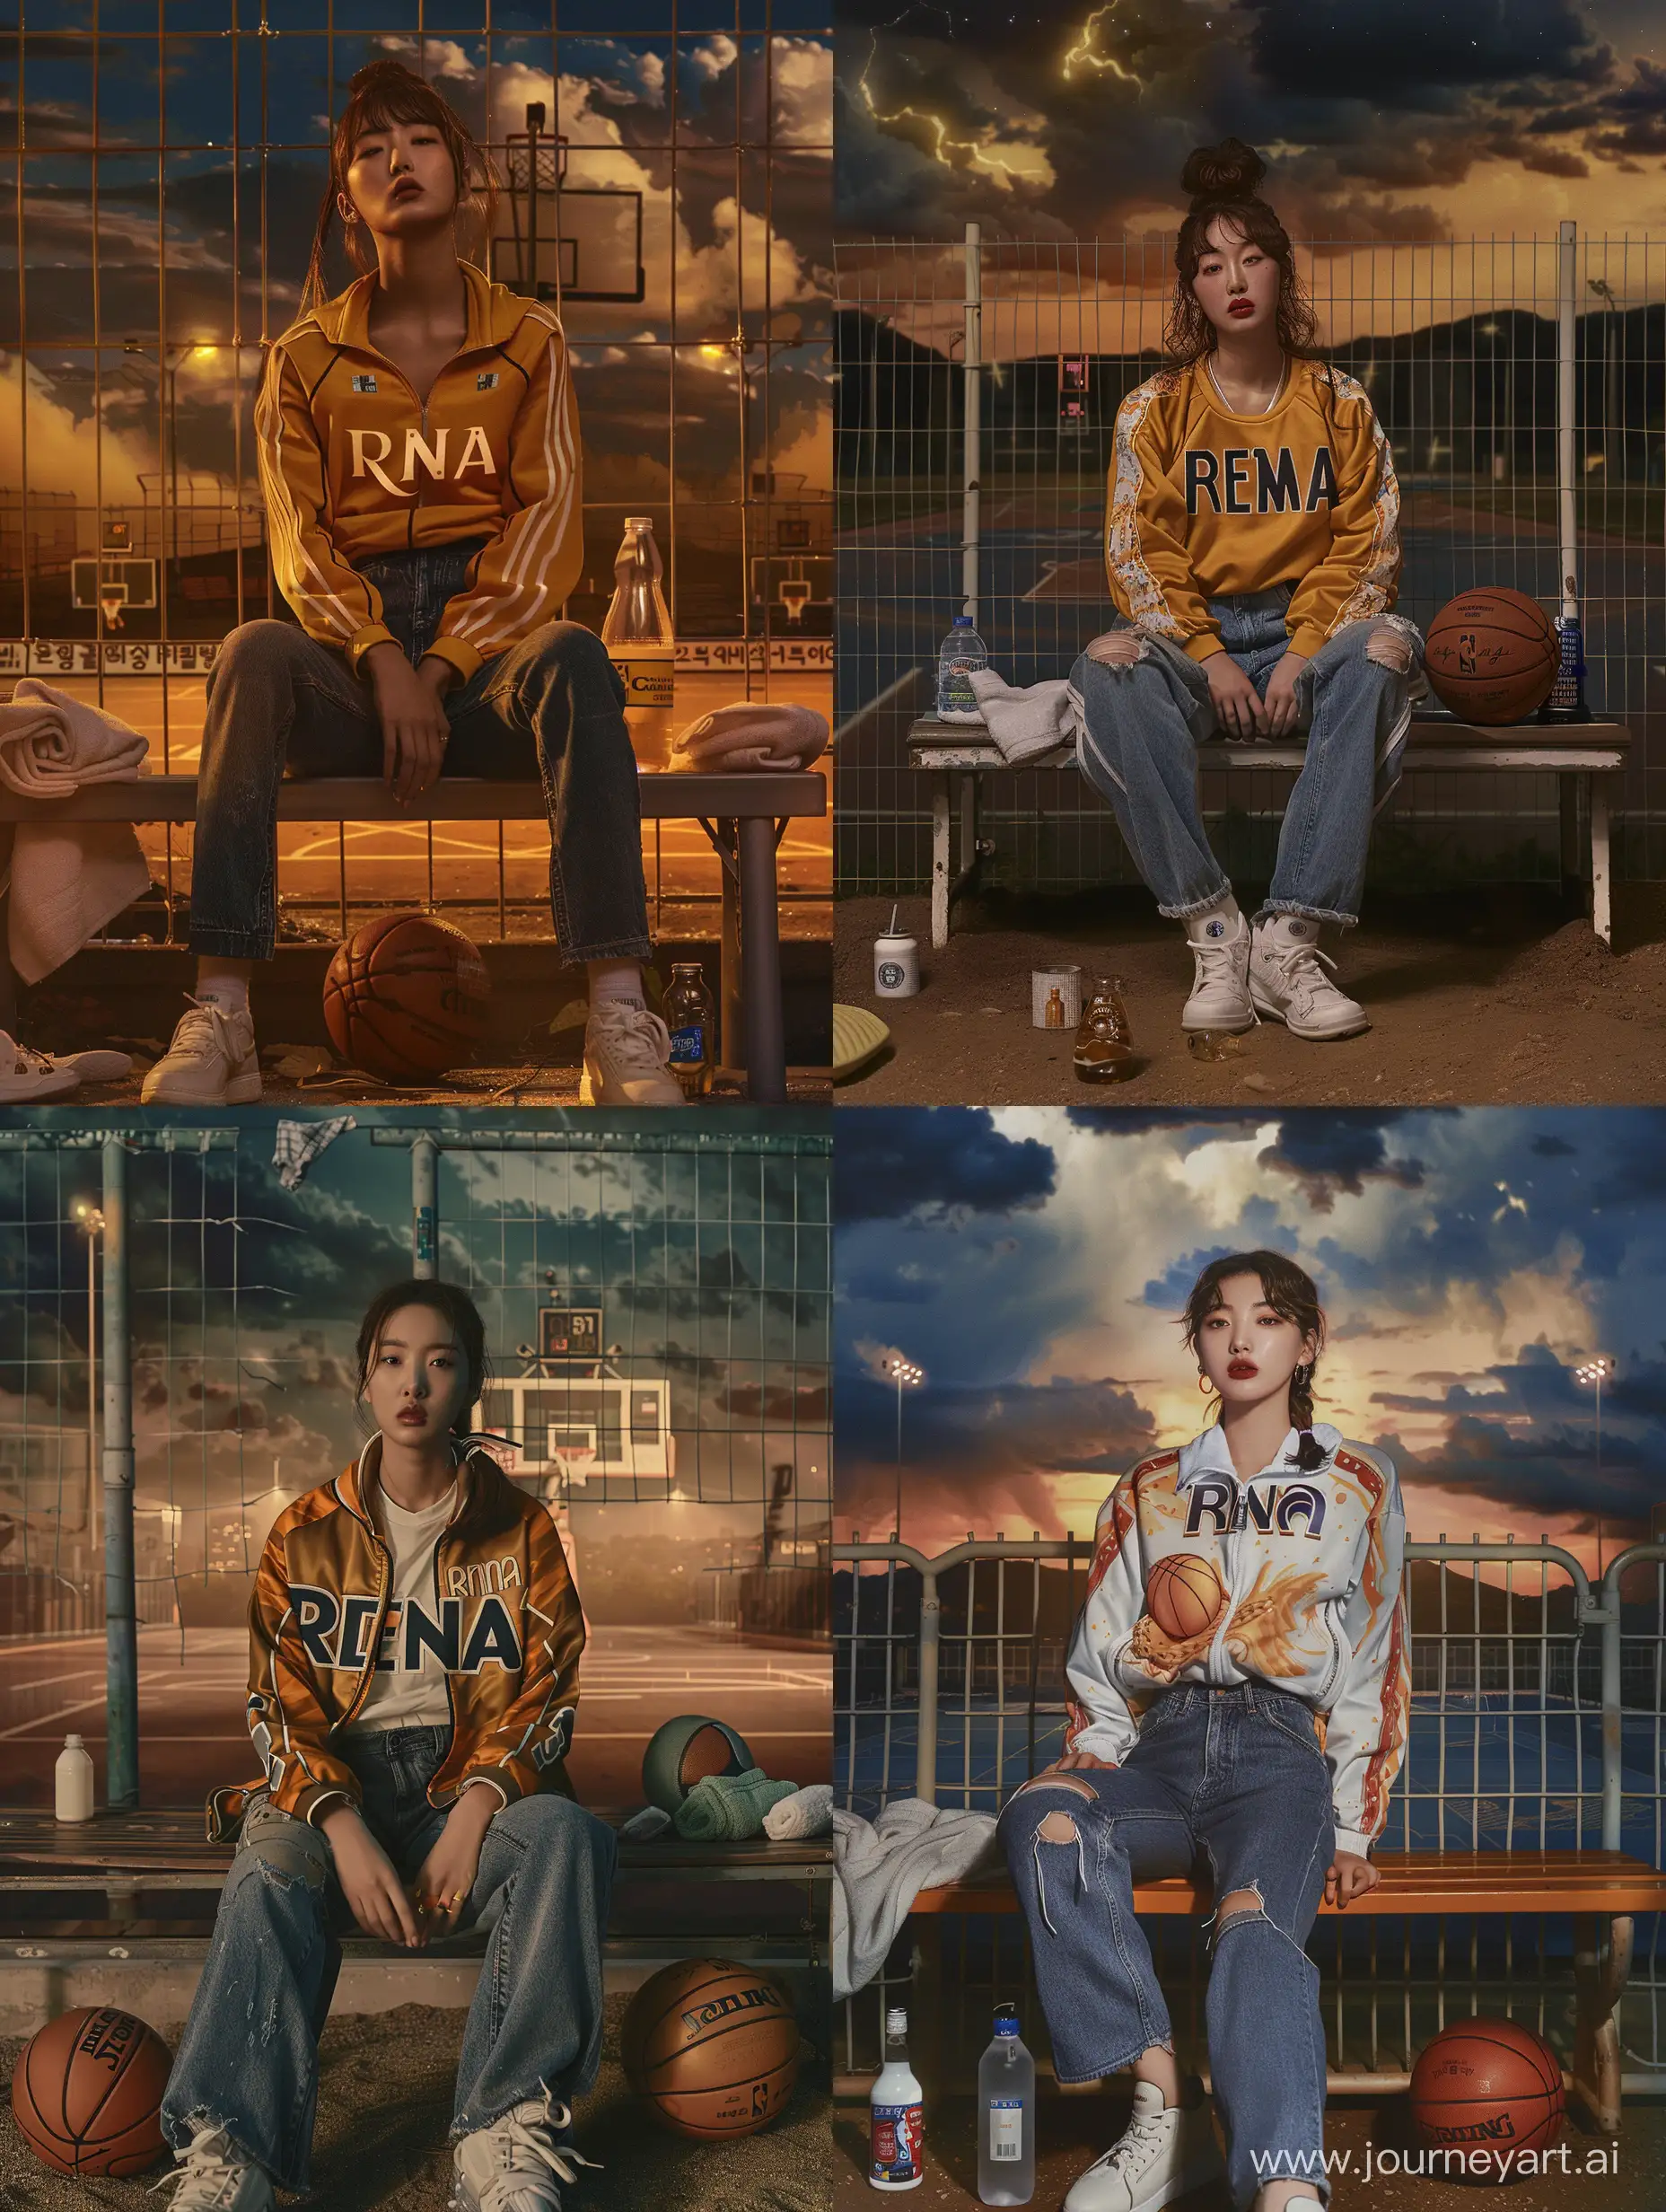 beautiful Korean woman with tied hair wearing a basketball tracksuit that says "RENA", jeans and white shoes, face must look real and detailed, sitting on a bench in front of the court fence, cinematic background showing a basketball court, basketball, small towel, drinking bottle, ultra HD, cloudy night, original photo, high detail, ultra sharp, 18mm lens, realistic, photography, Leica camera